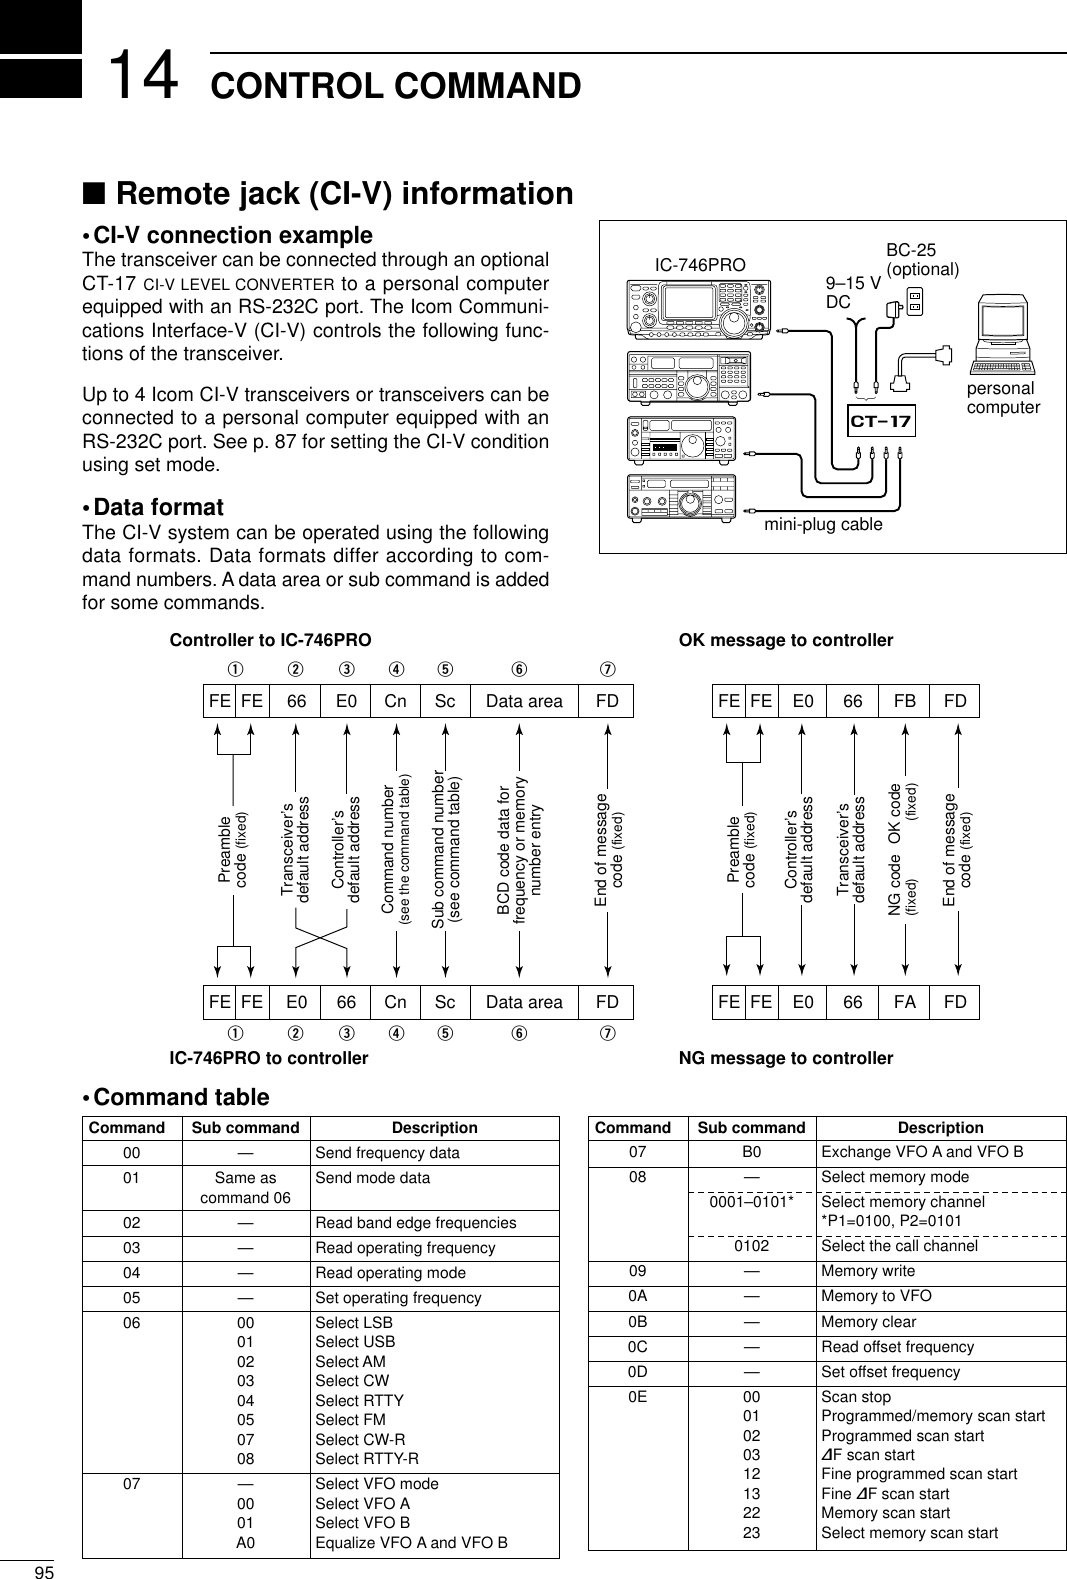 1495CONTROL COMMAND•CI-V connection exampleThe transceiver can be connected through an optionalCT-17 CI-V LEVEL CONVERTER to a personal computerequipped with an RS-232C port. The Icom Communi-cations Interface-V (CI-V) controls the following func-tions of the transceiver.Up to 4 Icom CI-V transceivers or transceivers can beconnected to a personal computer equipped with anRS-232C port. See p. 87 for setting the CI-V conditionusing set mode.•Data formatThe CI-V system can be operated using the followingdata formats. Data formats differ according to com-mand numbers. A data area or sub command is addedfor some commands.Controller to IC-746PROFE FE 66 E0 Cn Sc Data area FDPreamblecode (fixed)Transceiver’sdefault addressController’sdefault addressCommand number(see the command table)Sub command number(see command table)BCD code data forfrequency or memorynumber entryEnd of messagecode (fixed)OK message to controllerFE FE E0 66 FB FDFE FE E0 66 FA FDPreamblecode (fixed)Controller’sdefault addressTransceiver’sdefault addressOK code(fixed)End of messagecode (fixed)NG message to controllerNG code(fixed)IC-746PRO to controllerqwert y uFE FE E0 66 Cn Sc Data area FDqwert y u■Remote jack (CI-V) information9–15 VDCpersonalcomputerct- 17BC-25(optional)IC-746PROmini-plug cable•Command tableCommand Sub command Description00 —Send frequency data01 Same as  Send mode datacommand 0602 —Read band edge frequencies03 —Read operating frequency04 —Read operating mode05 —Set operating frequency 06 00 Select LSB01 Select USB02 Select AM03 Select CW04 Select RTTY05 Select FM07 Select CW-R08 Select RTTY-R07 —Select VFO mode00 Select VFO A01 Select VFO BA0 Equalize VFO A and VFO BCommand Sub command Description07 B0 Exchange VFO A and VFO B08 —Select memory mode0001–0101* Select memory channel*P1=0100, P2=01010102 Select the call channel09 —Memory write0A —Memory to VFO0B —Memory clear0C —Read offset frequency0D —Set offset frequency0E 00 Scan stop01 Programmed/memory scan start02 Programmed scan start03 ∂F scan start12 Fine programmed scan start13 Fine ∂F scan start22 Memory scan start23 Select memory scan start